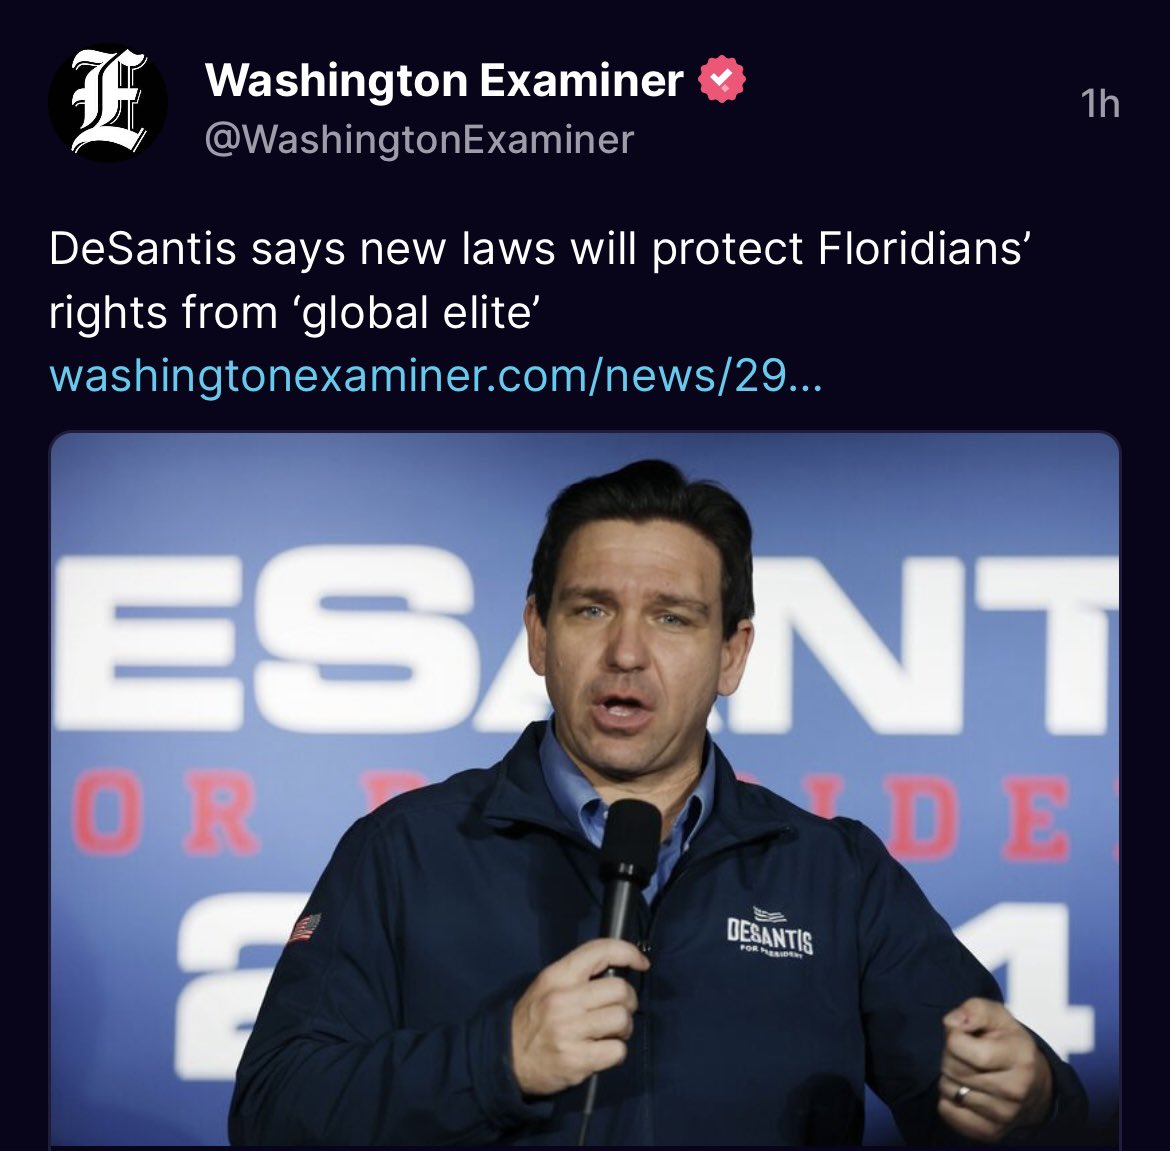 He’s running out of culture war material here, so now he’s banning things that private citizens are discussing in other countries while inflation, auto, & property insurance rates are the highest in the nation in FL.